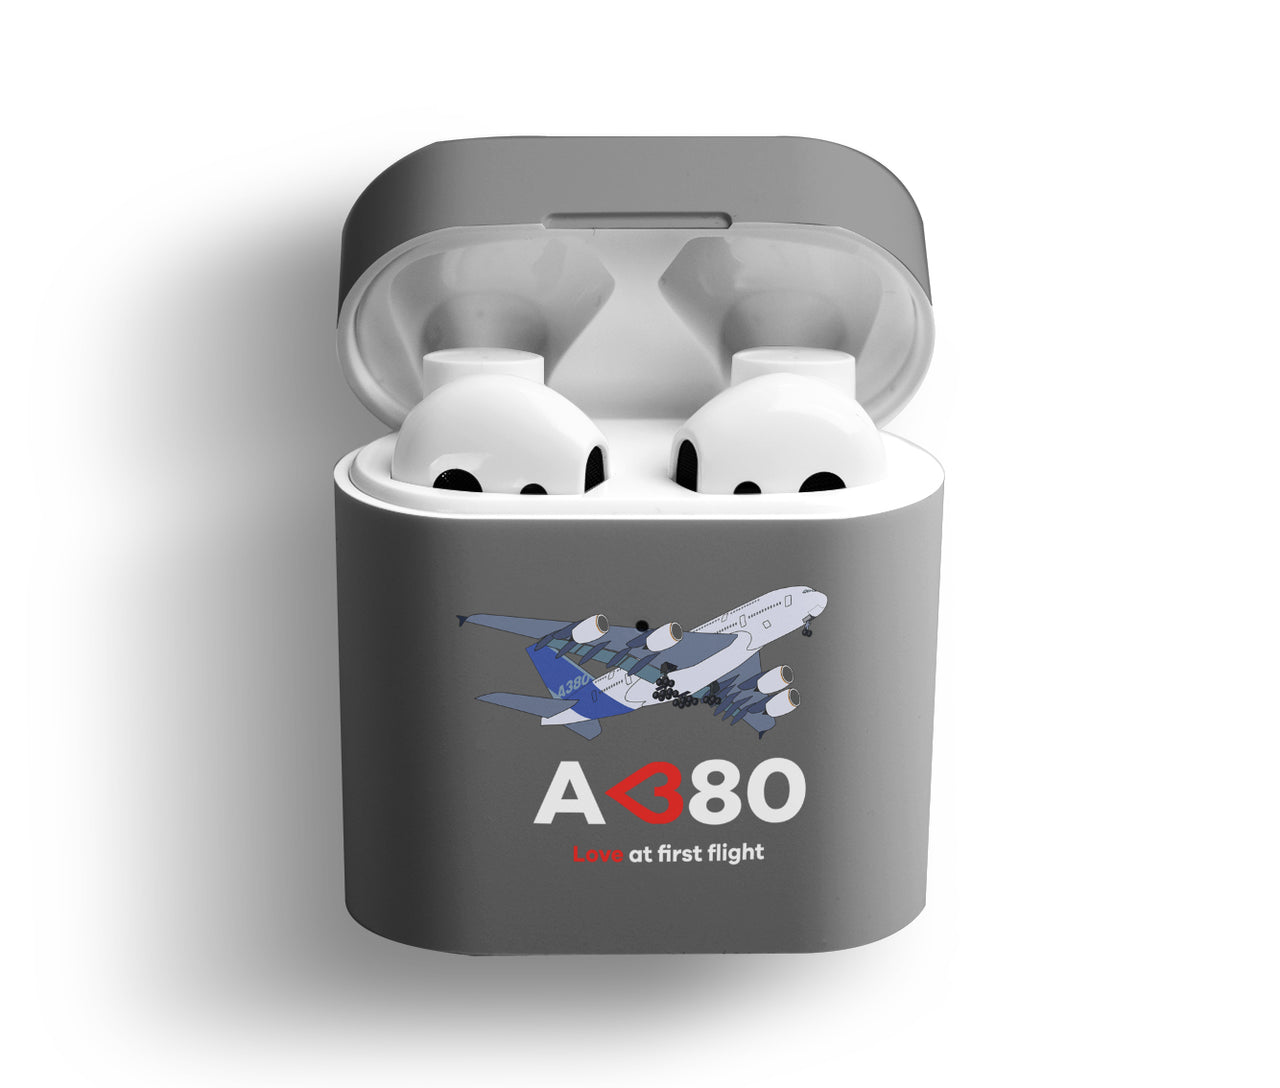 Airbus A380 Love at first flight Designed AirPods  Cases